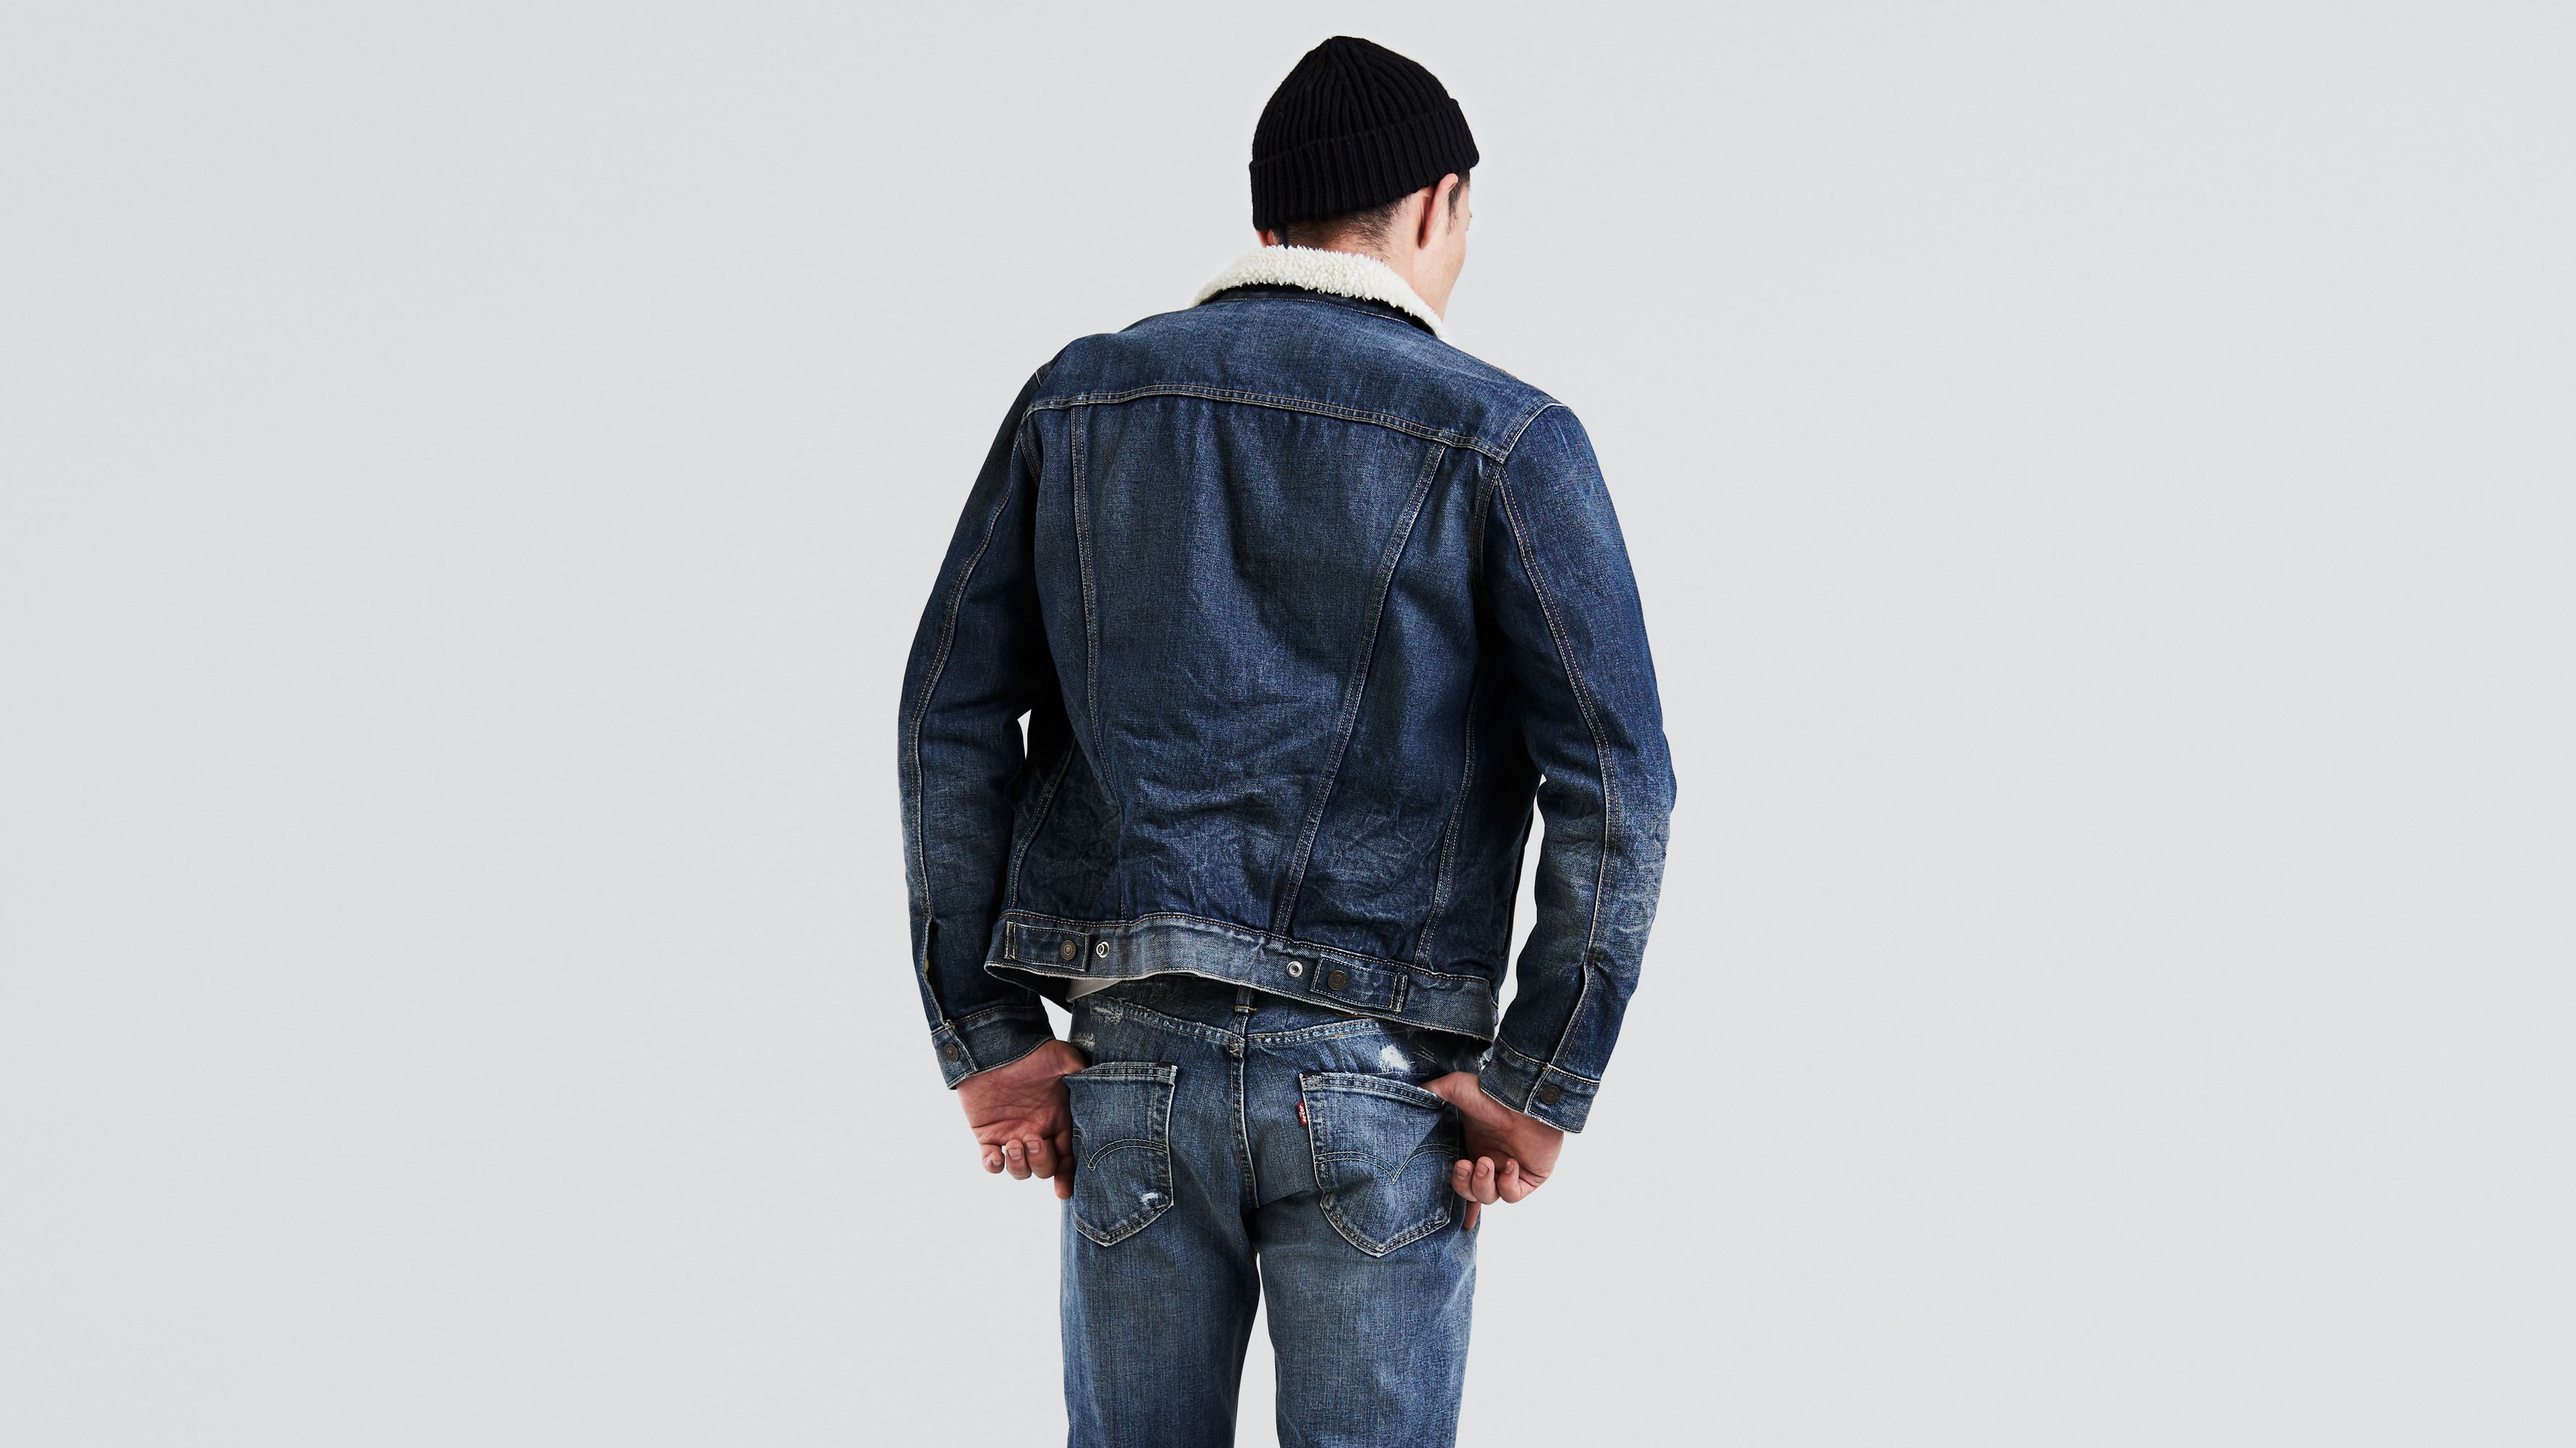 Levi's' Most Iconic Denim Jacket Is Just $60 on Amazon - Men's Journal